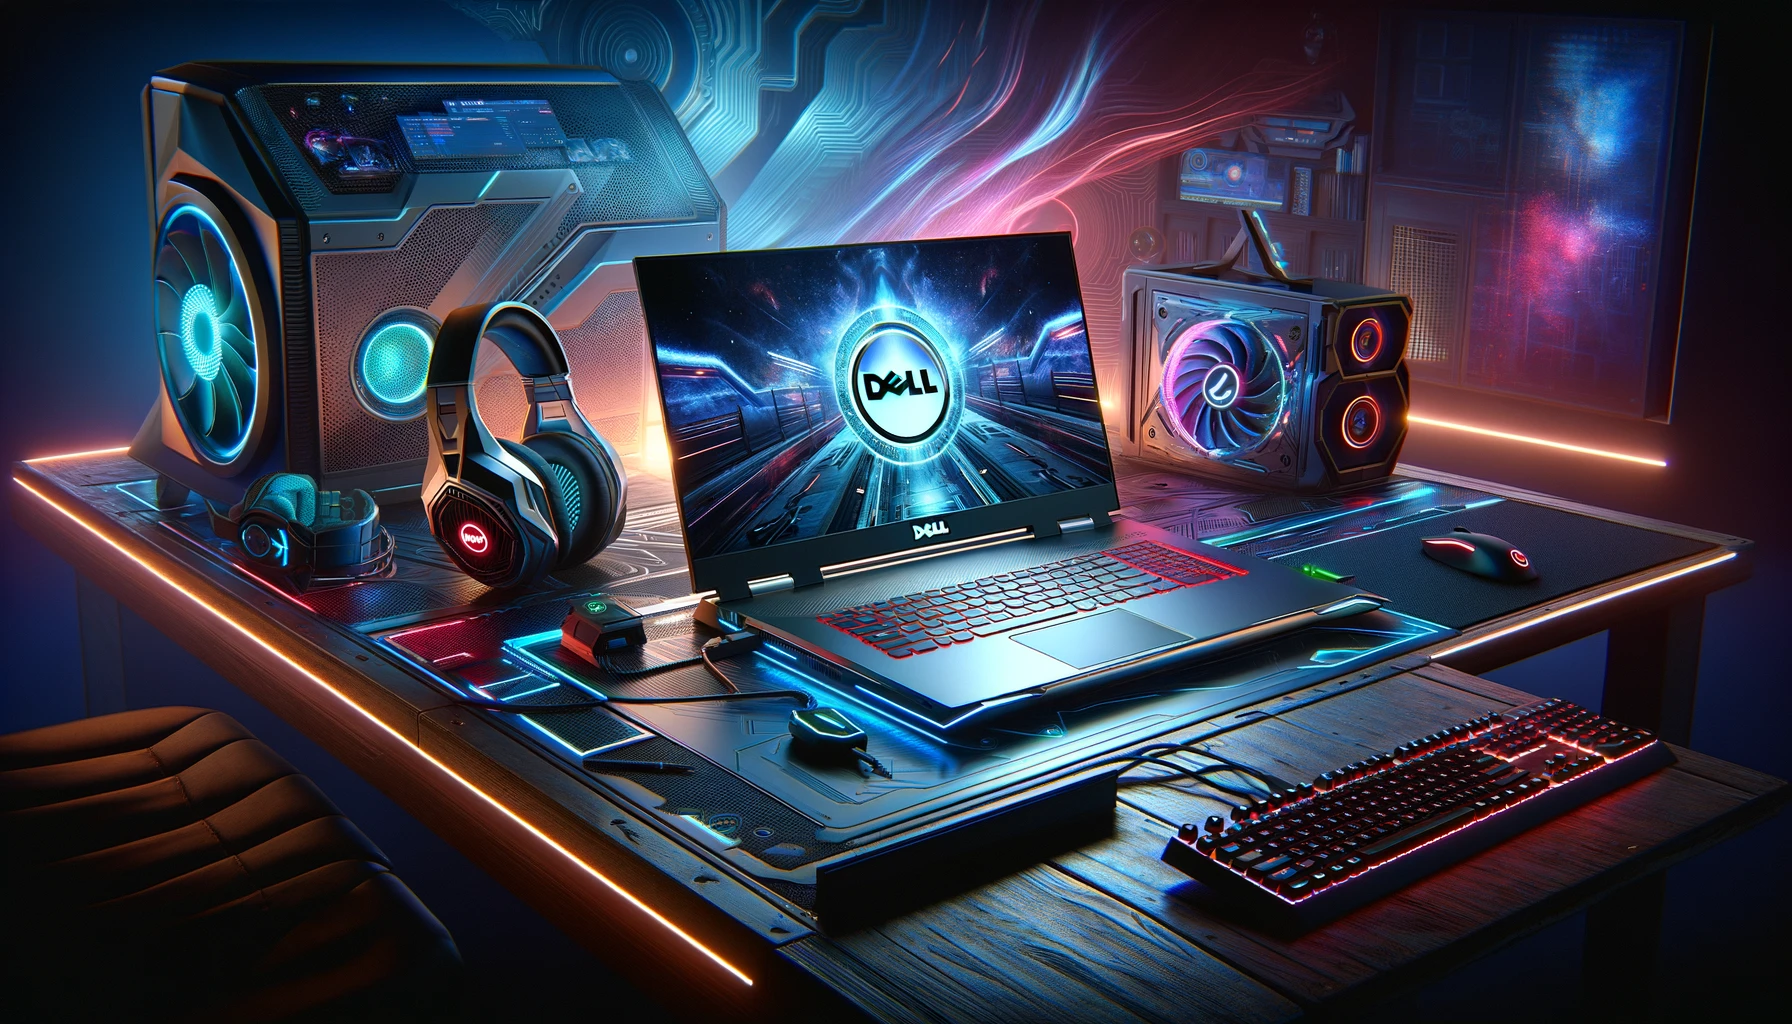 The image above presents a 3D stock photo of a Dell gaming laptop, set within a high-tech gaming environment, illuminated by dynamic RGB lighting to emphasize its advanced gaming capabilities and the immersive world of gaming technology